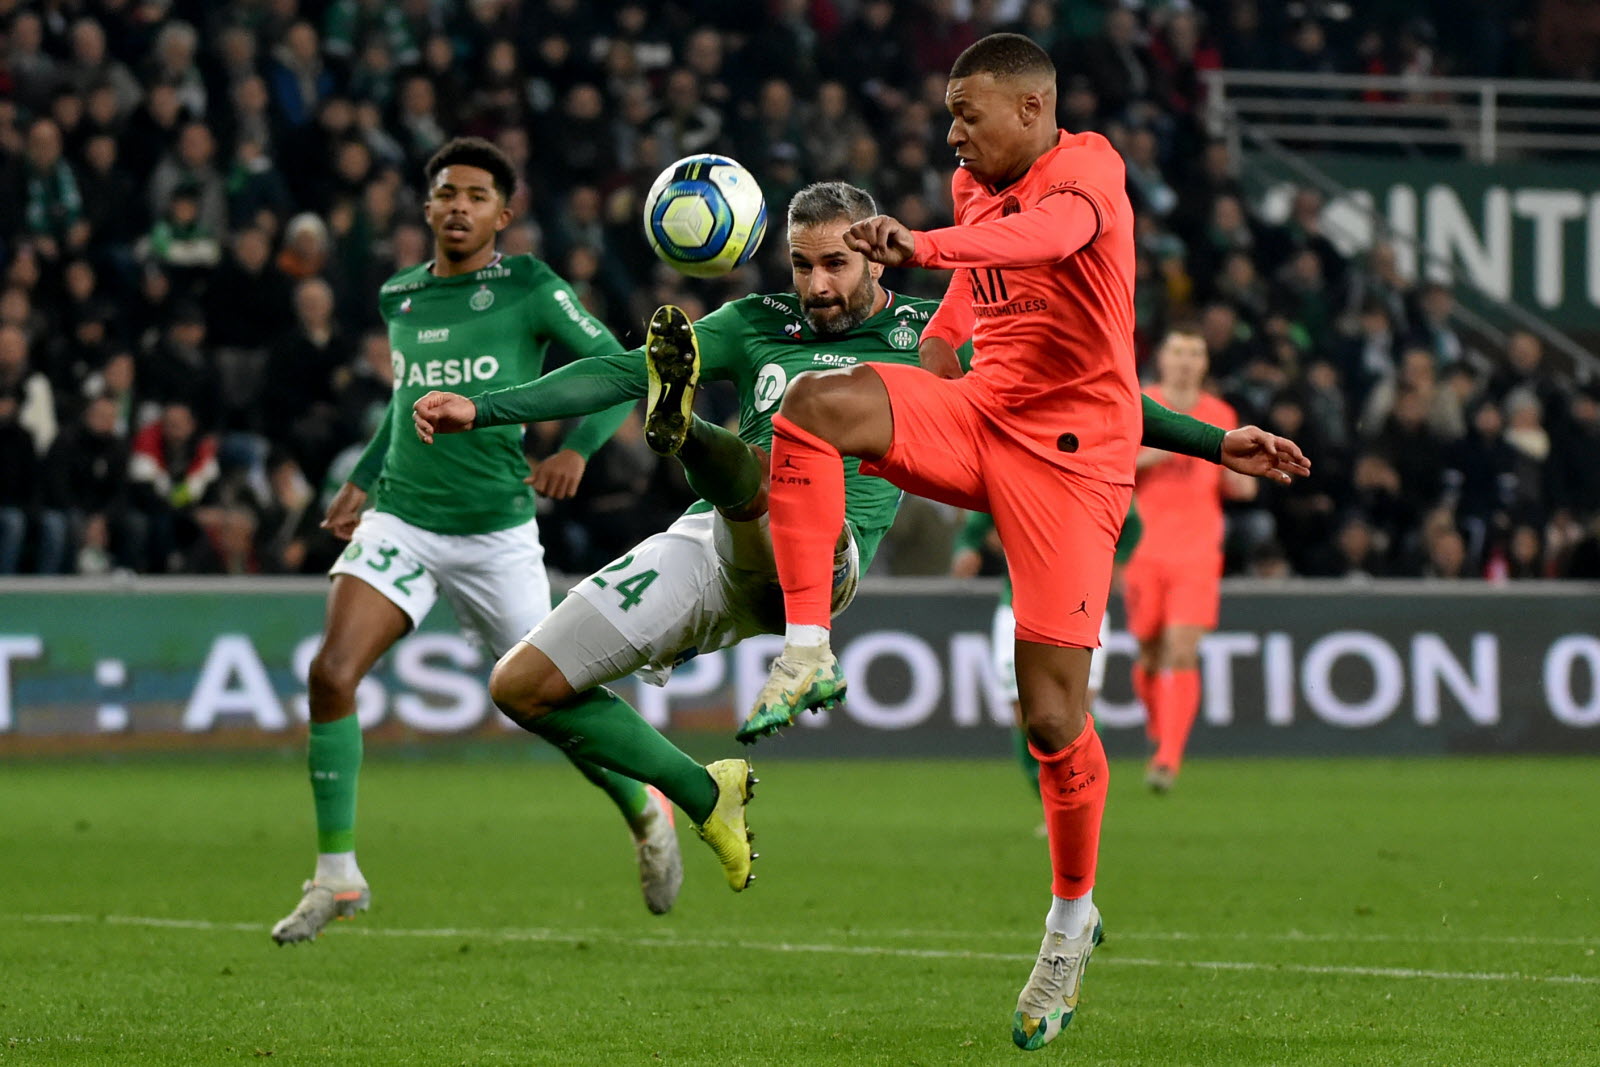 mbappe et perrin photo progres remy perrin 1576500856